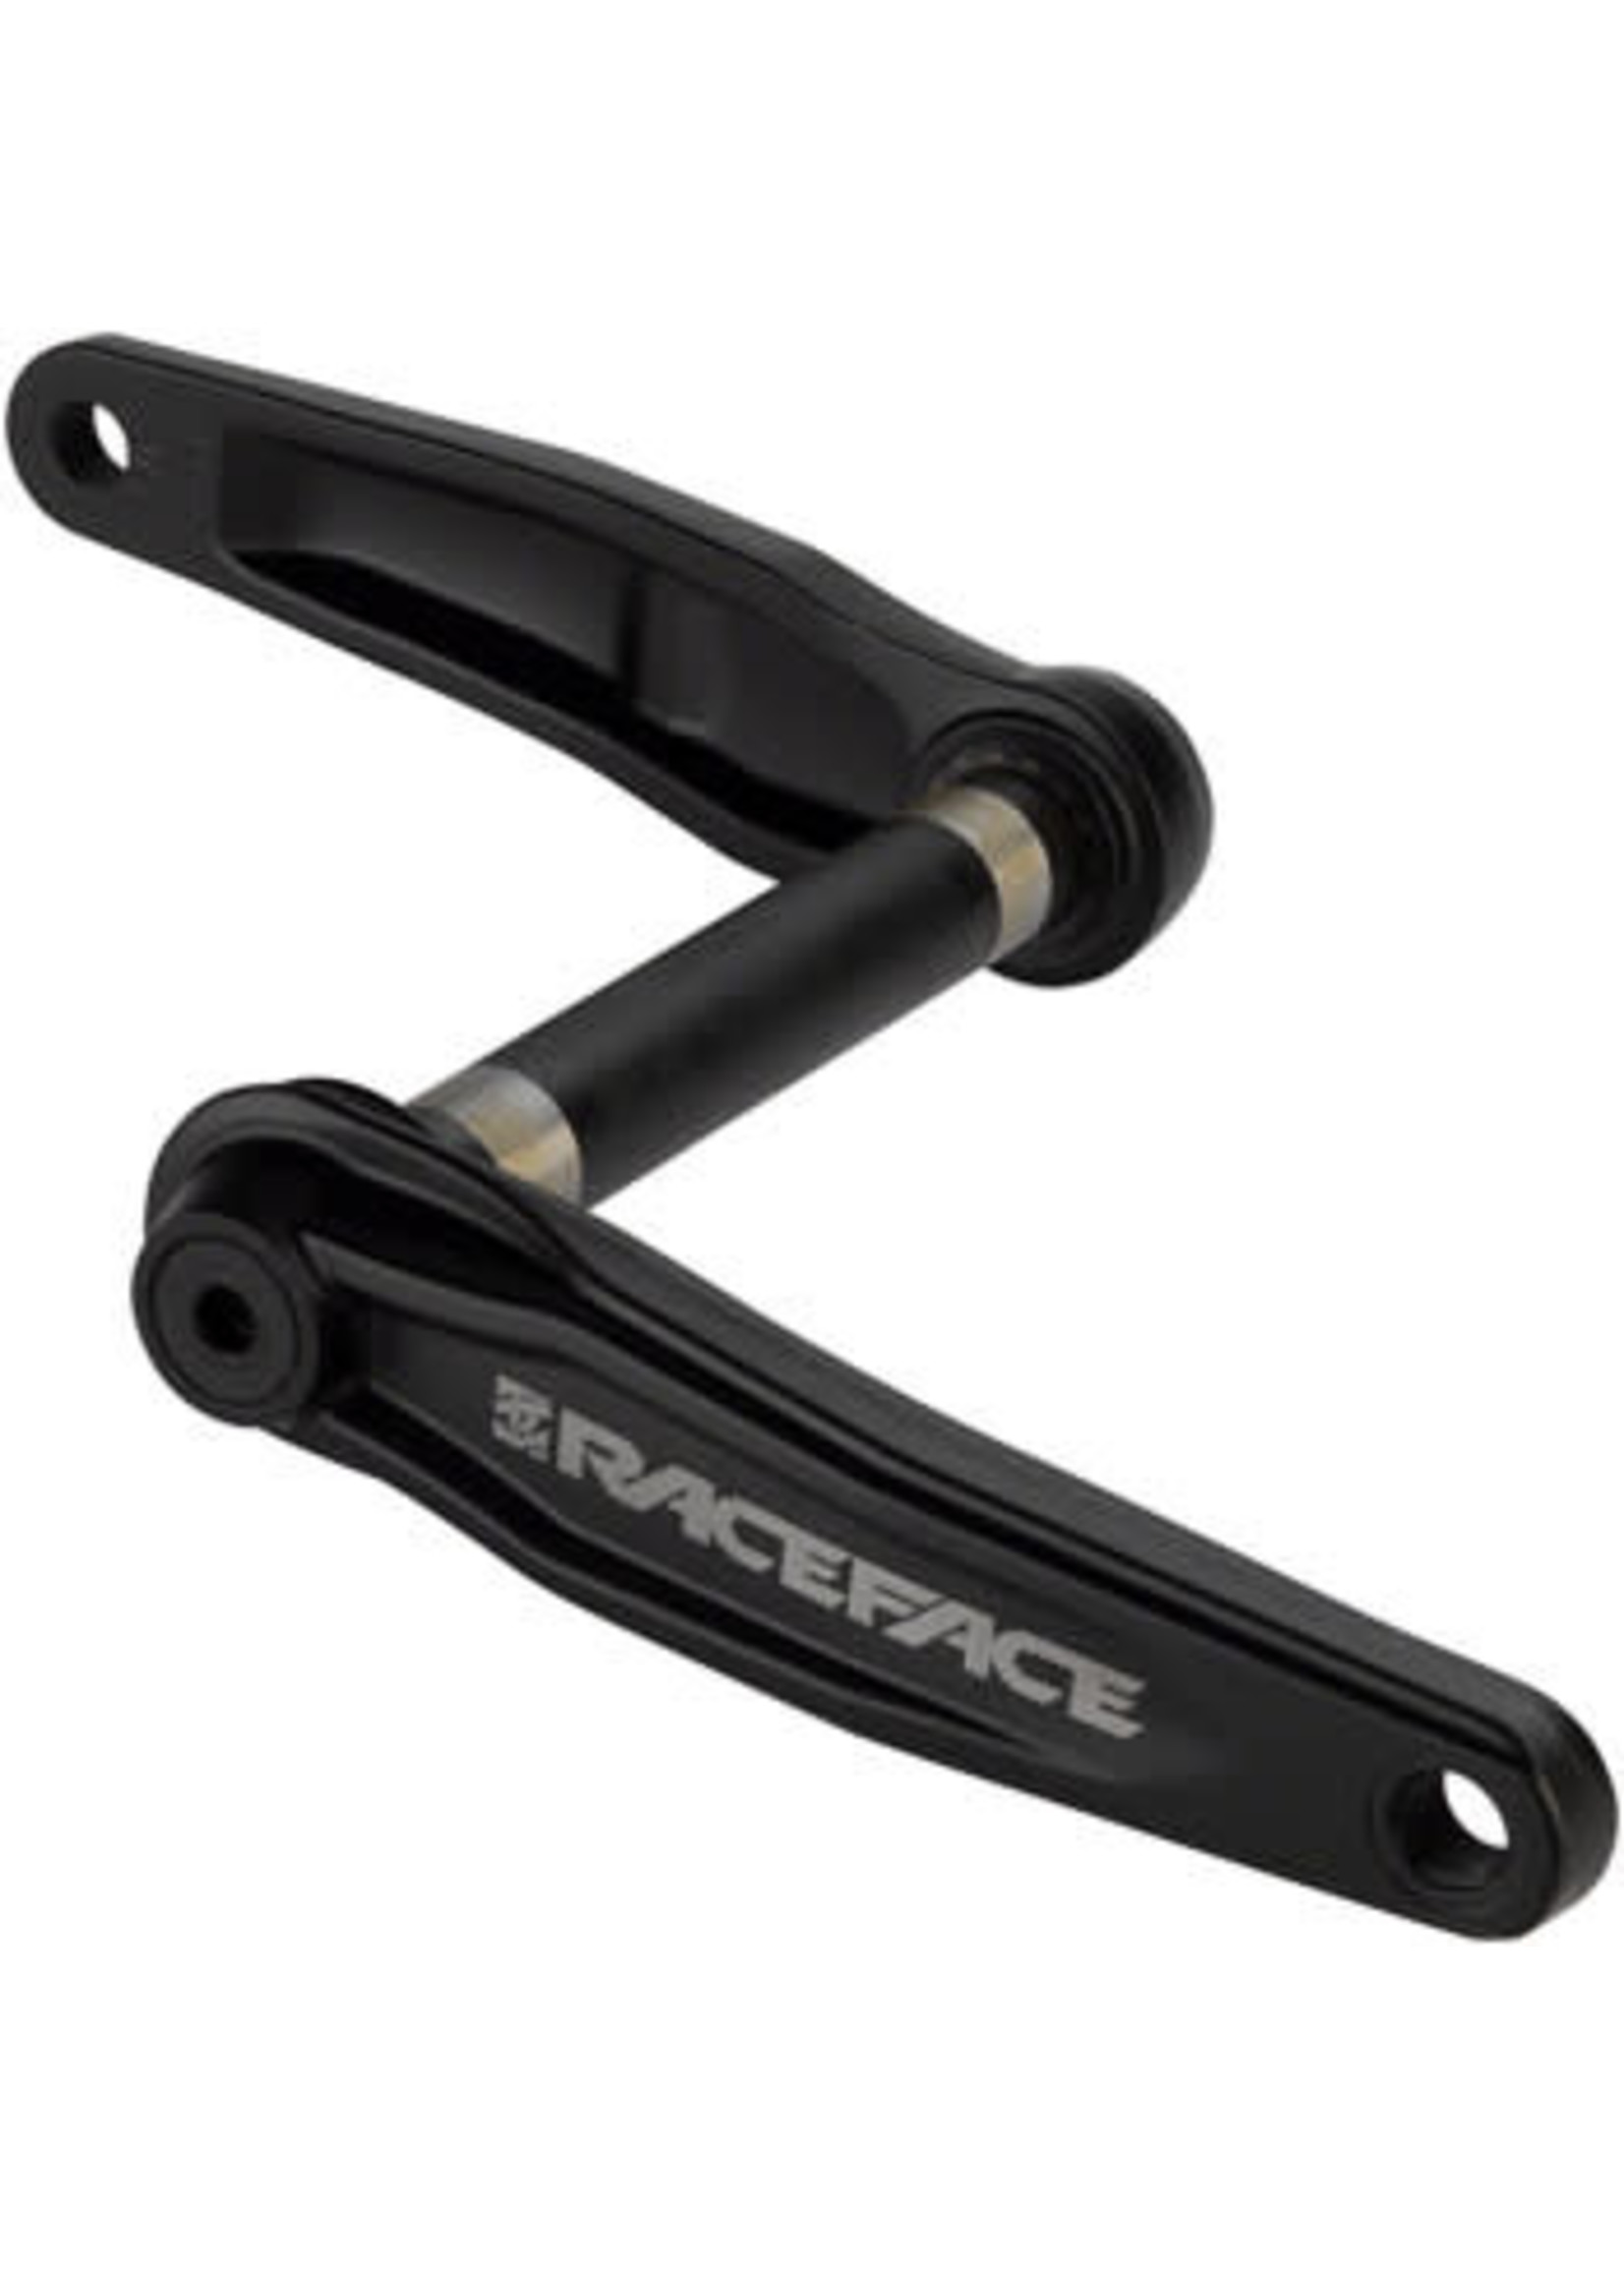 RaceFace RaceFace Ride Fat Bike Crankset - 175mm, Direct Mount, RaceFace EXI Spindle Interface, For 190mm Rear Spacing